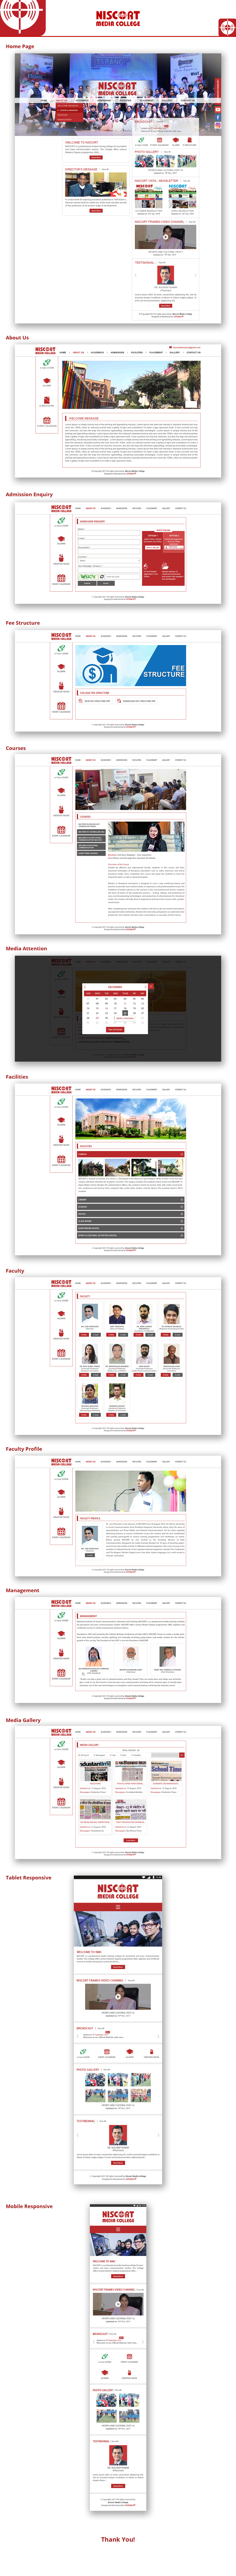 Collage Website Mockups college interface design College Project media media college Media Design Media Website Design